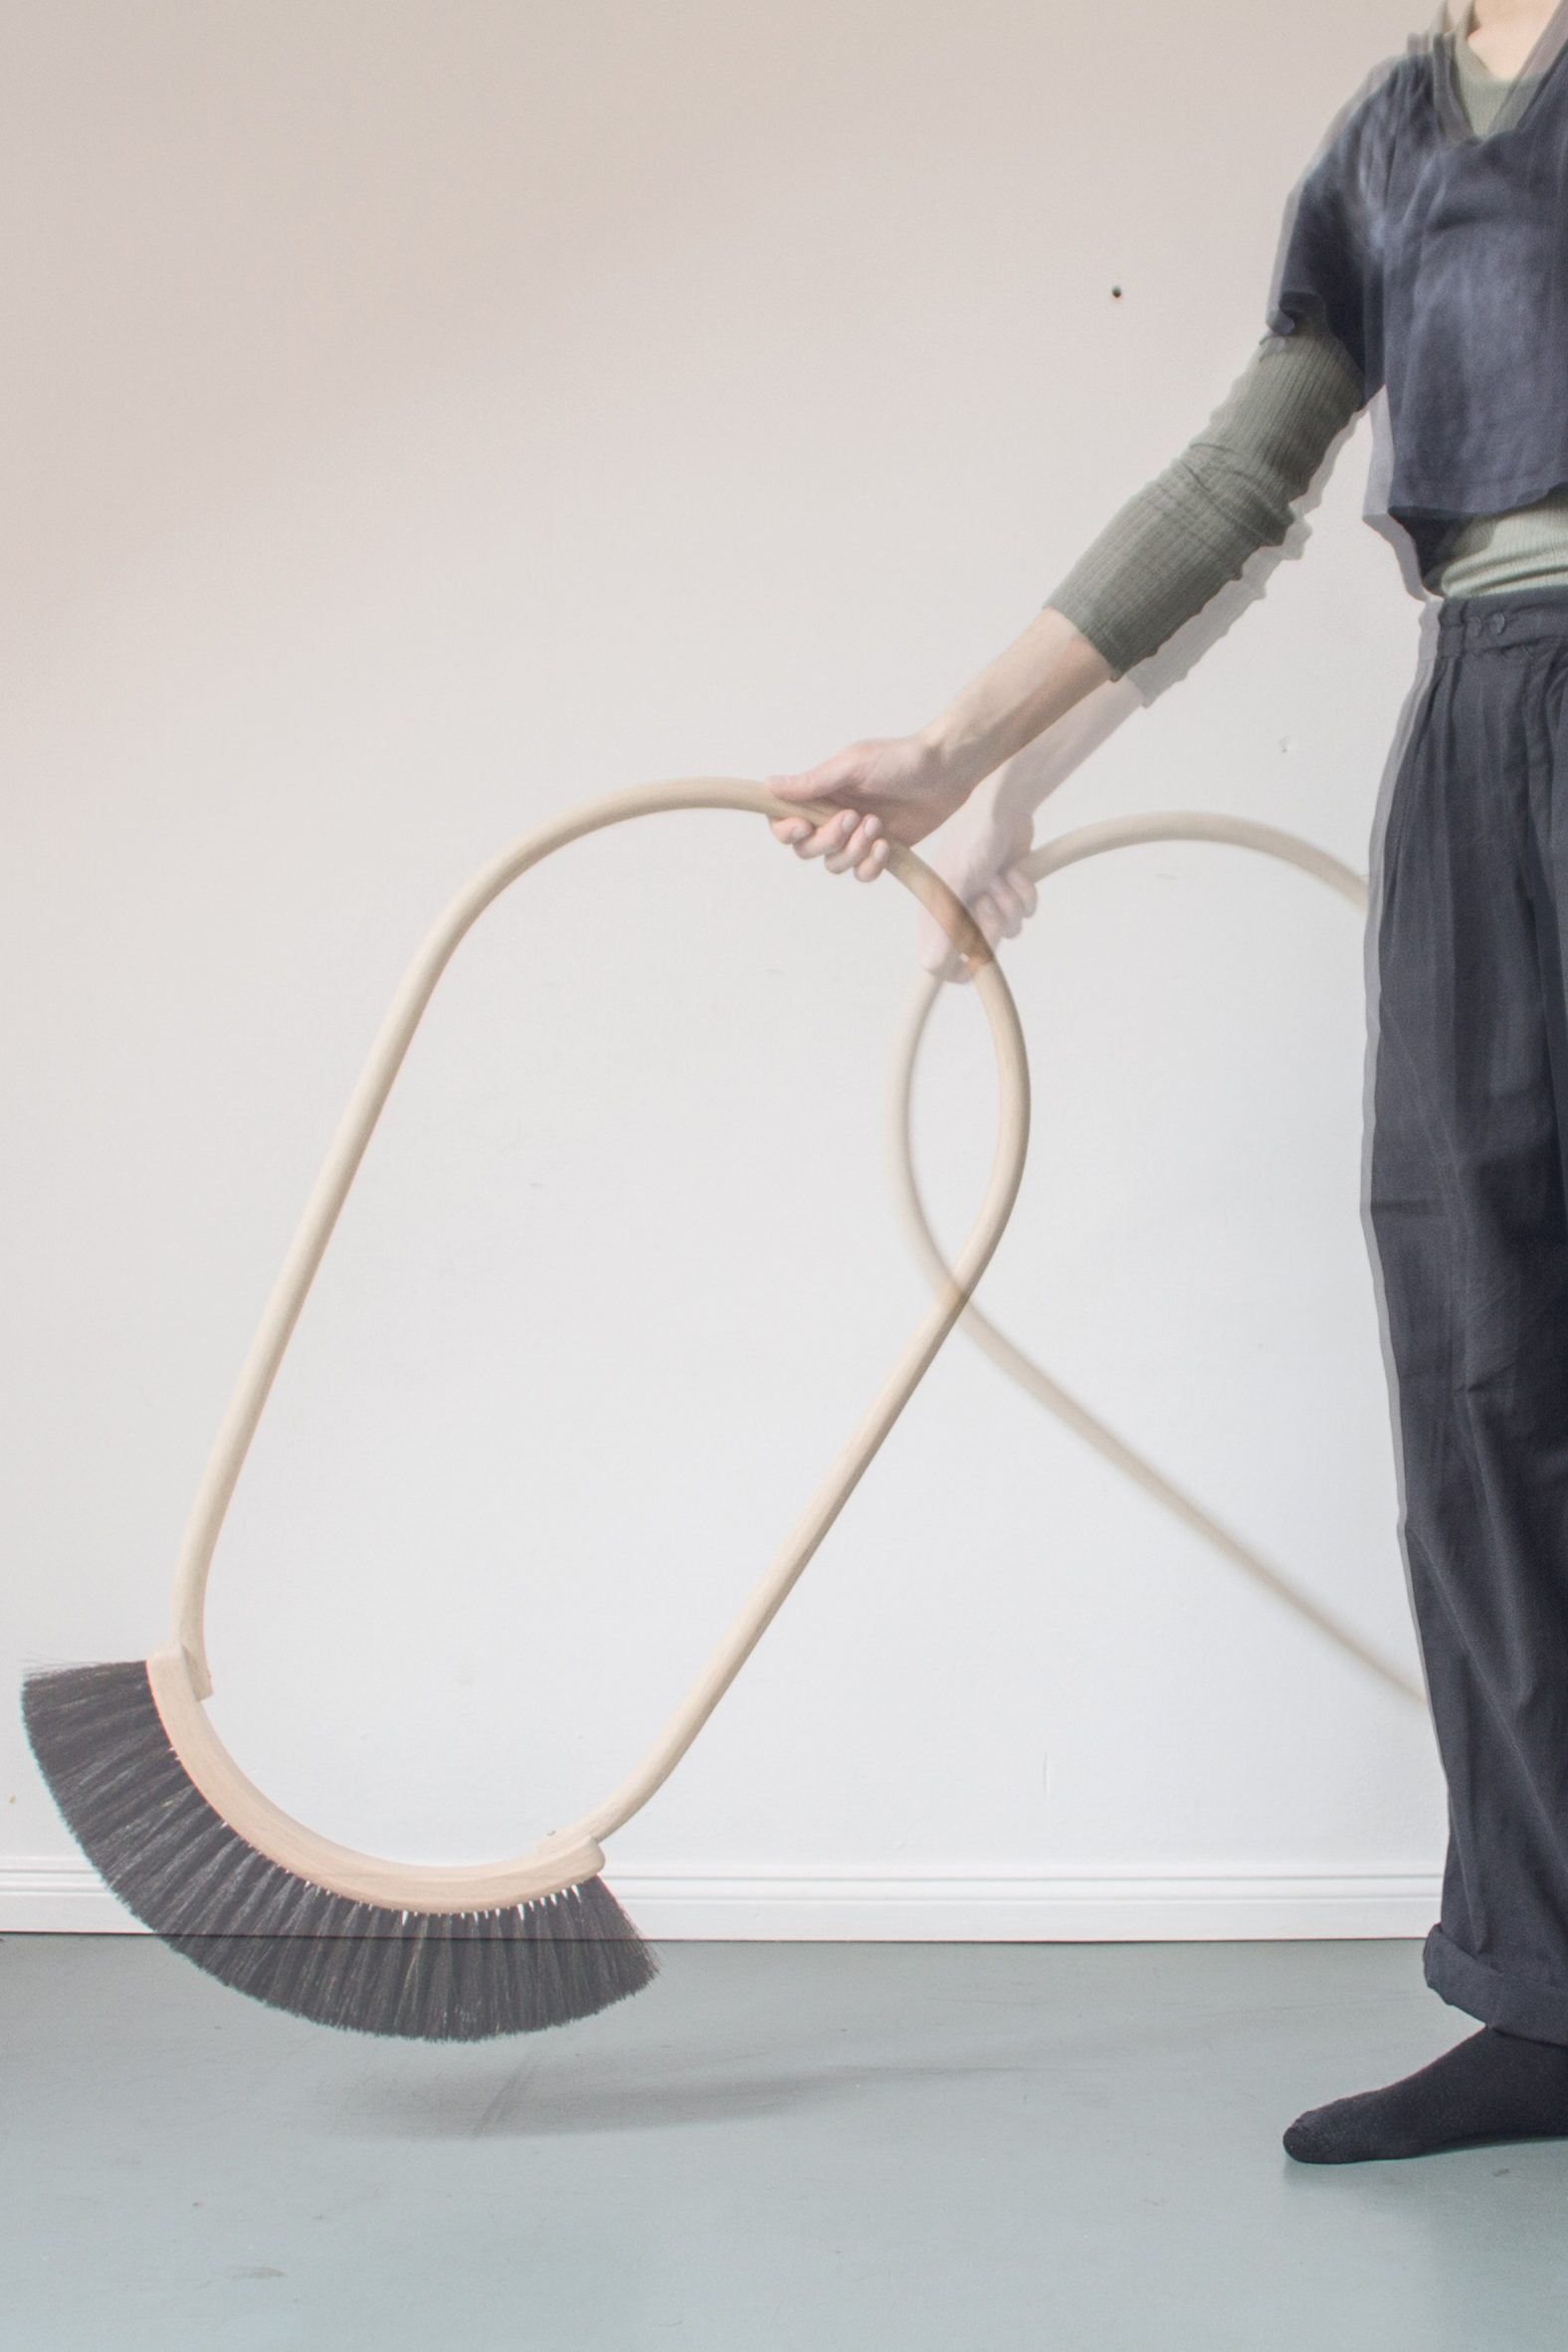 a person holding a broom with an oval handle